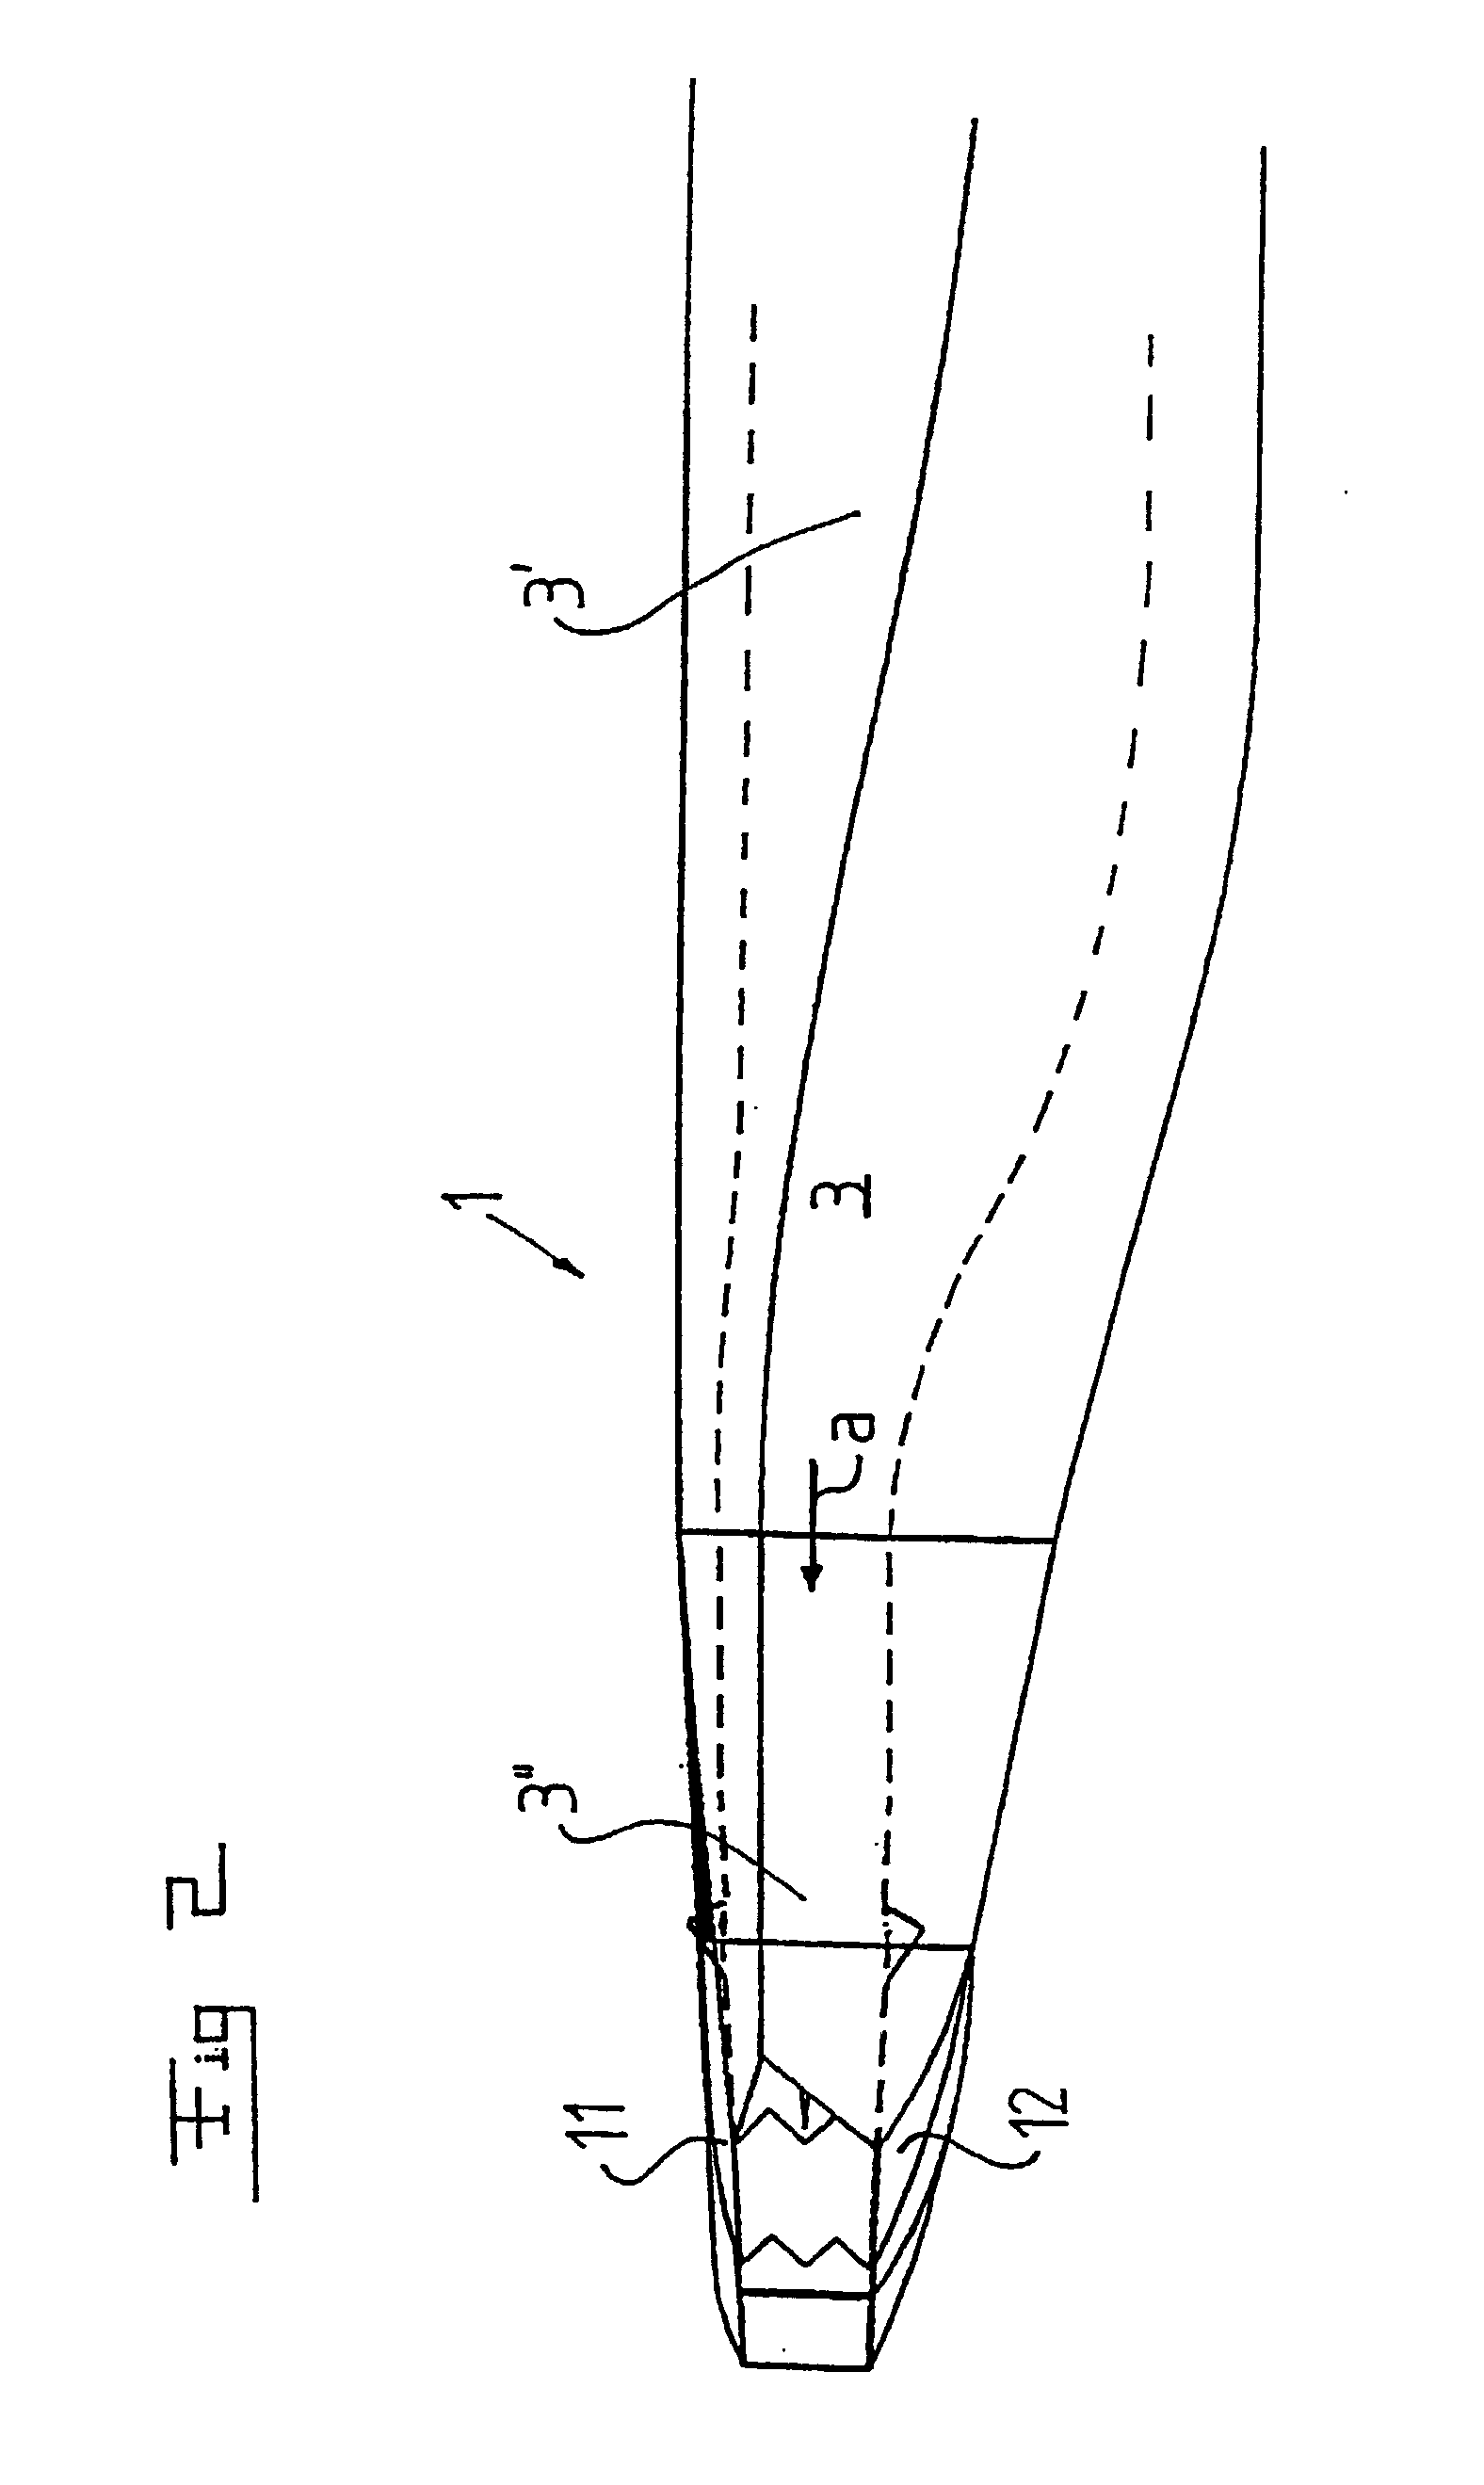 Outlet device for a jet engine